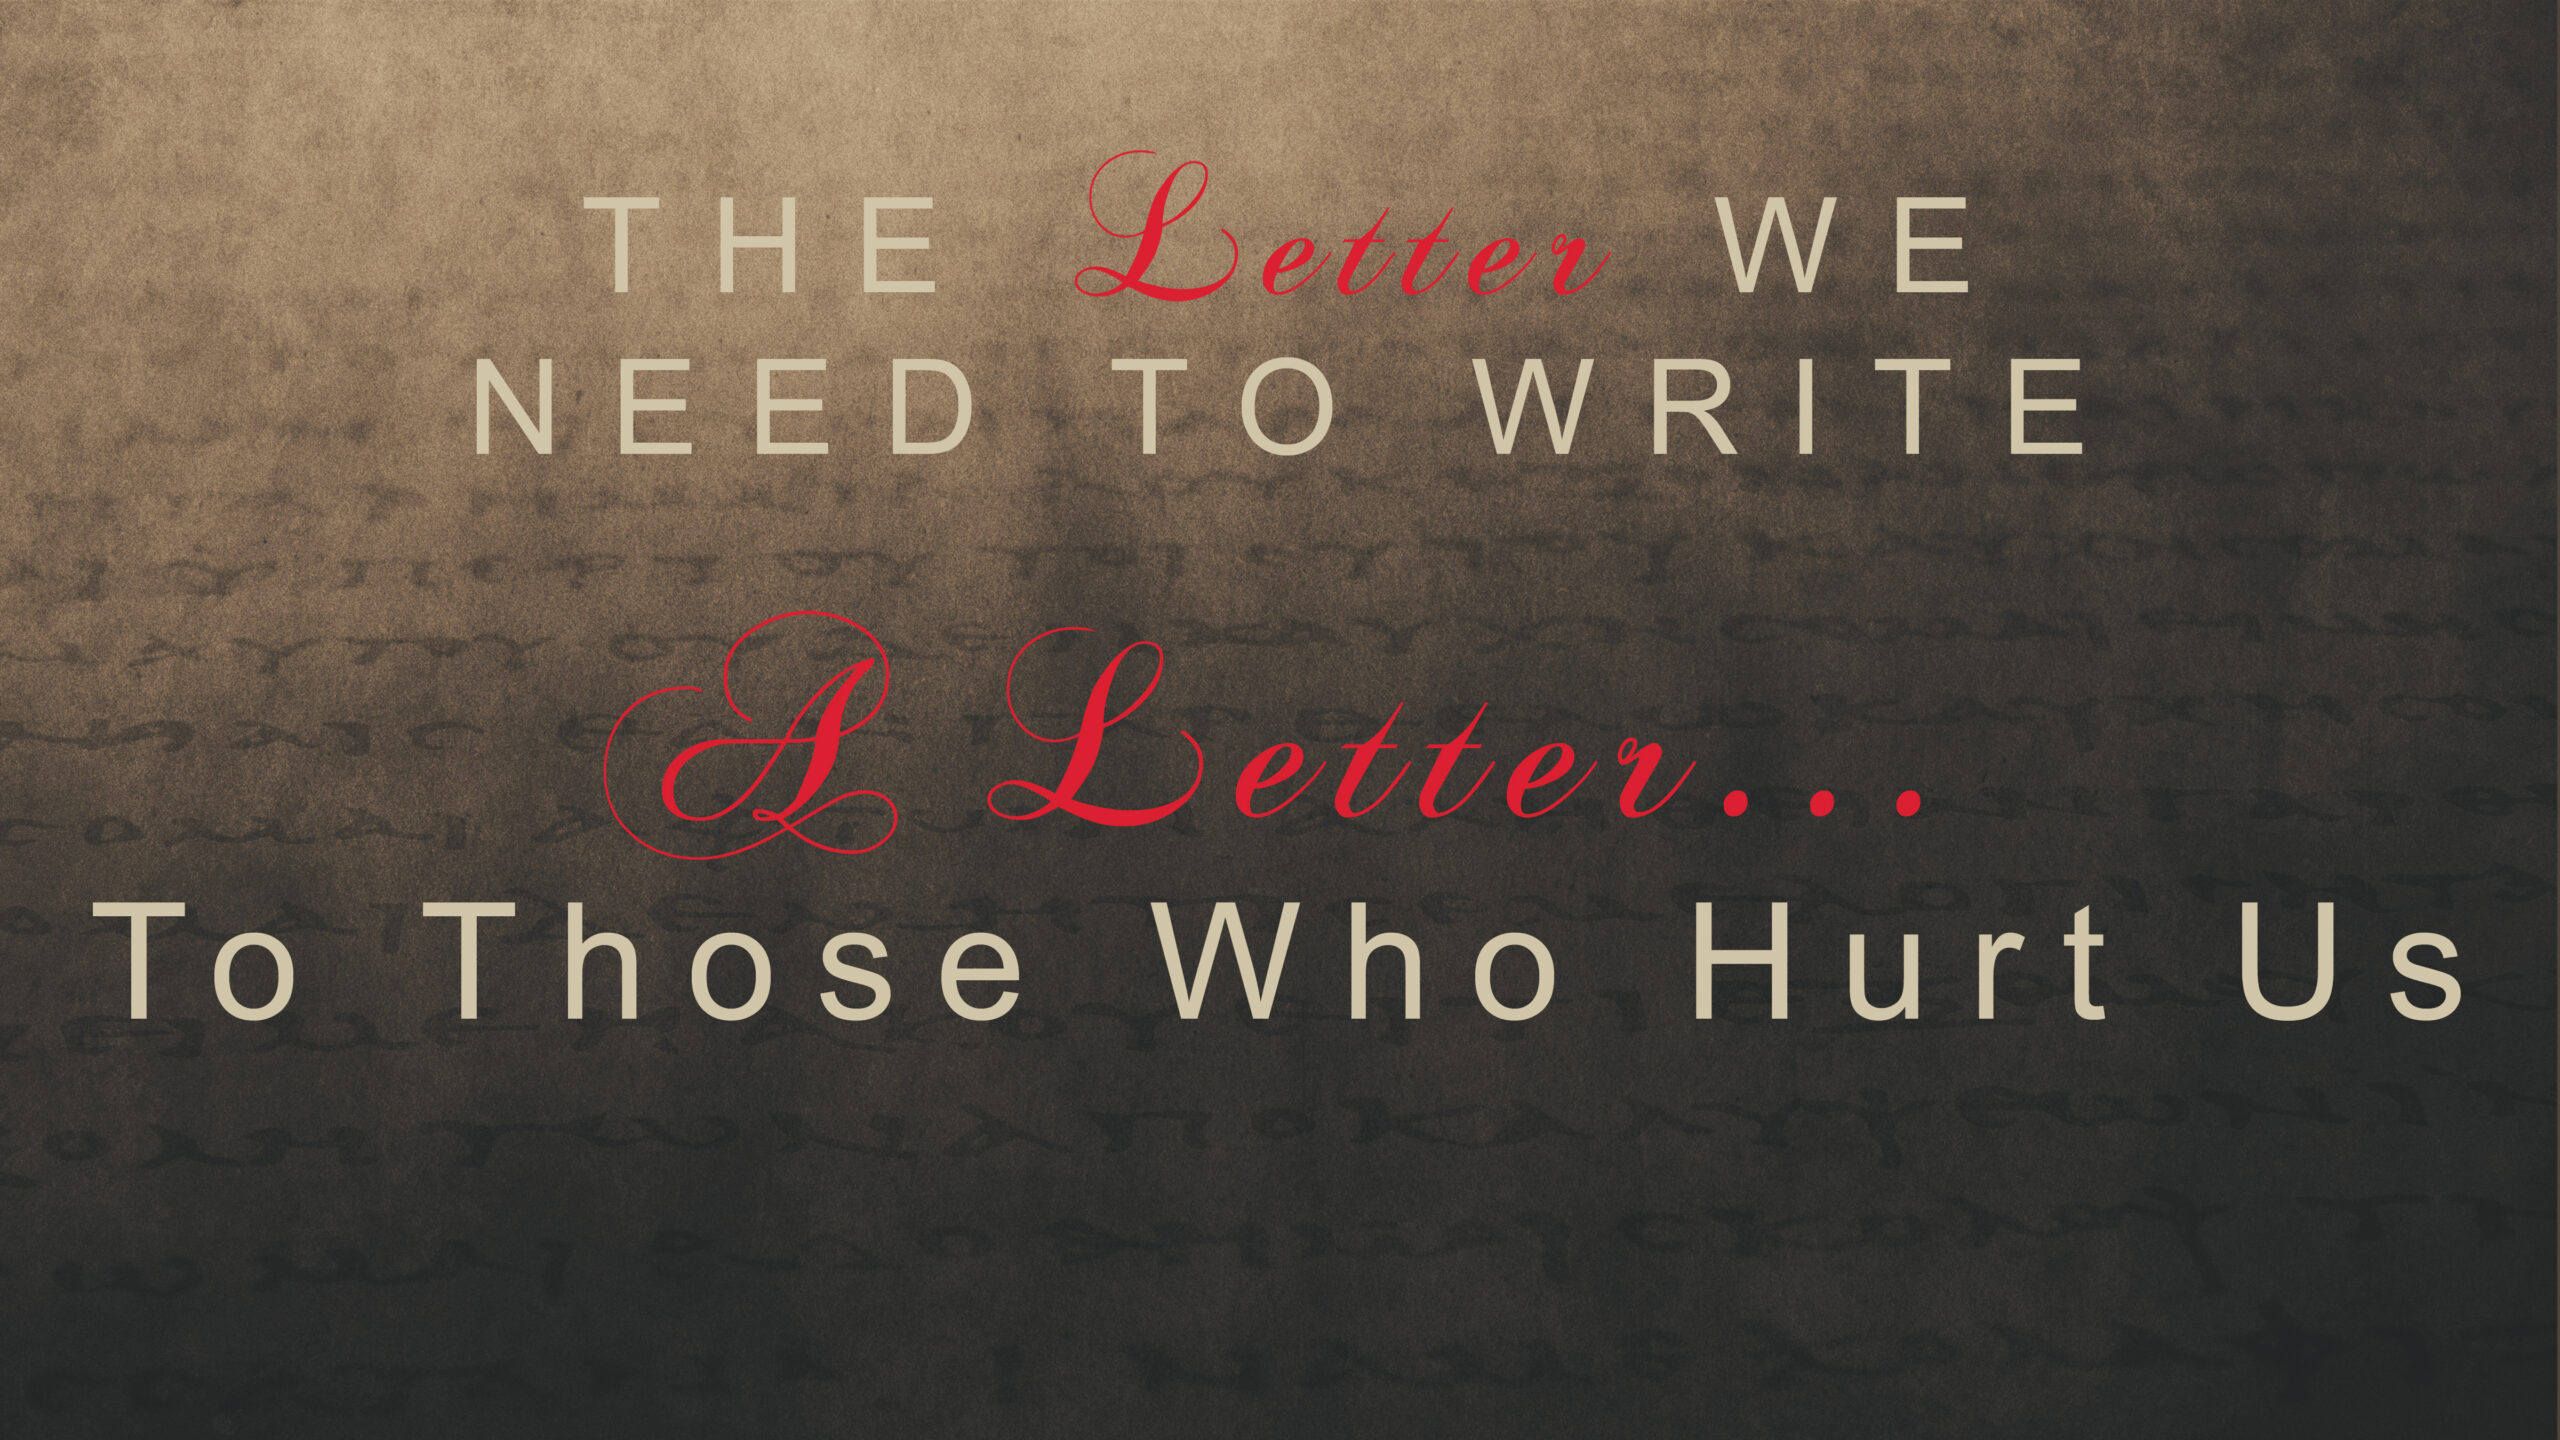 The Letter We Nee to Write PART 5 “A Letter…To Those Who Hurt Us” (THRIVE Service)